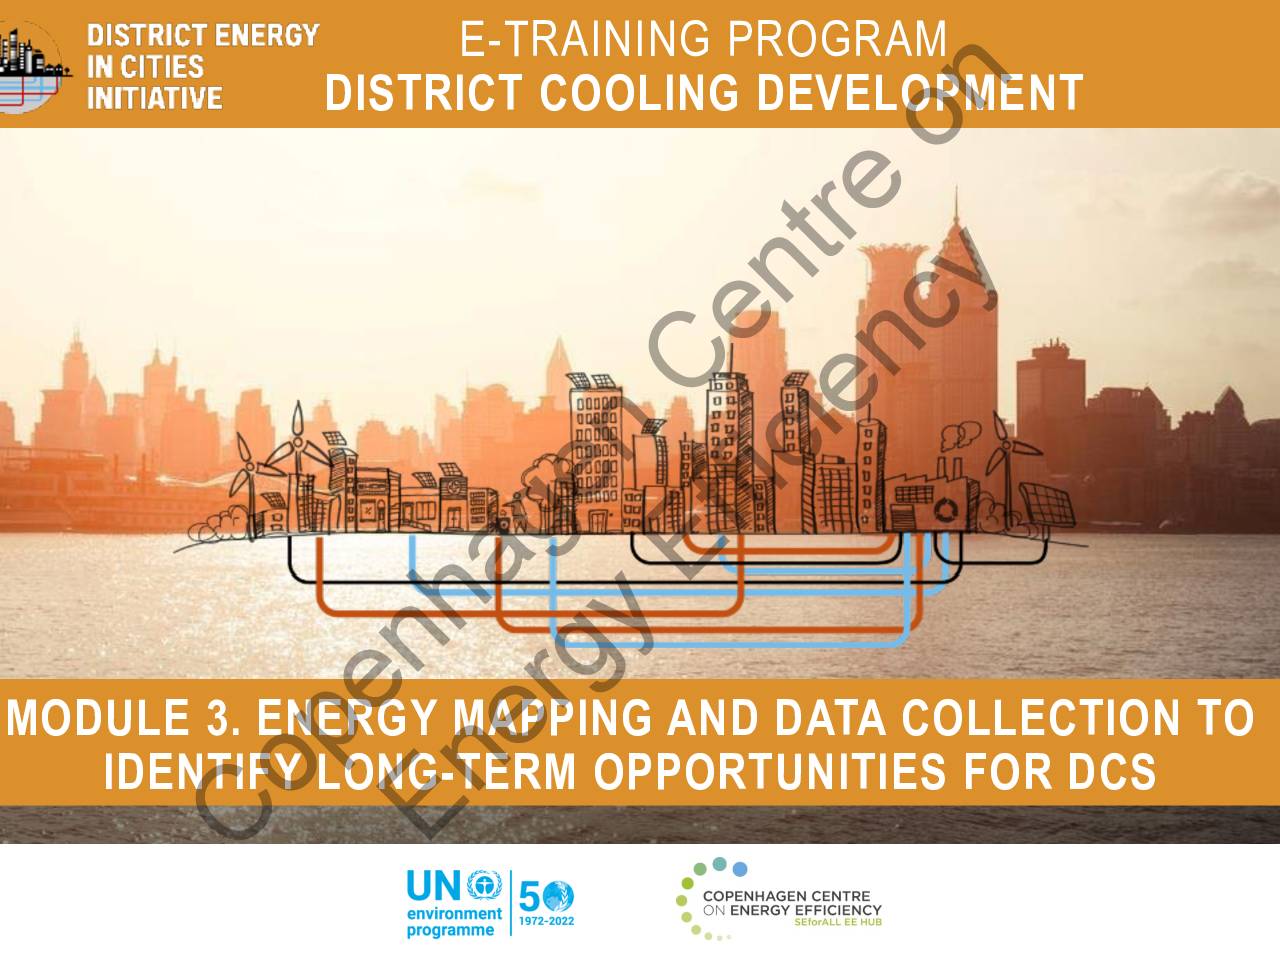 Module 3 – Energy mapping and data collection to identify long-term opportunities for District Cooling Systems